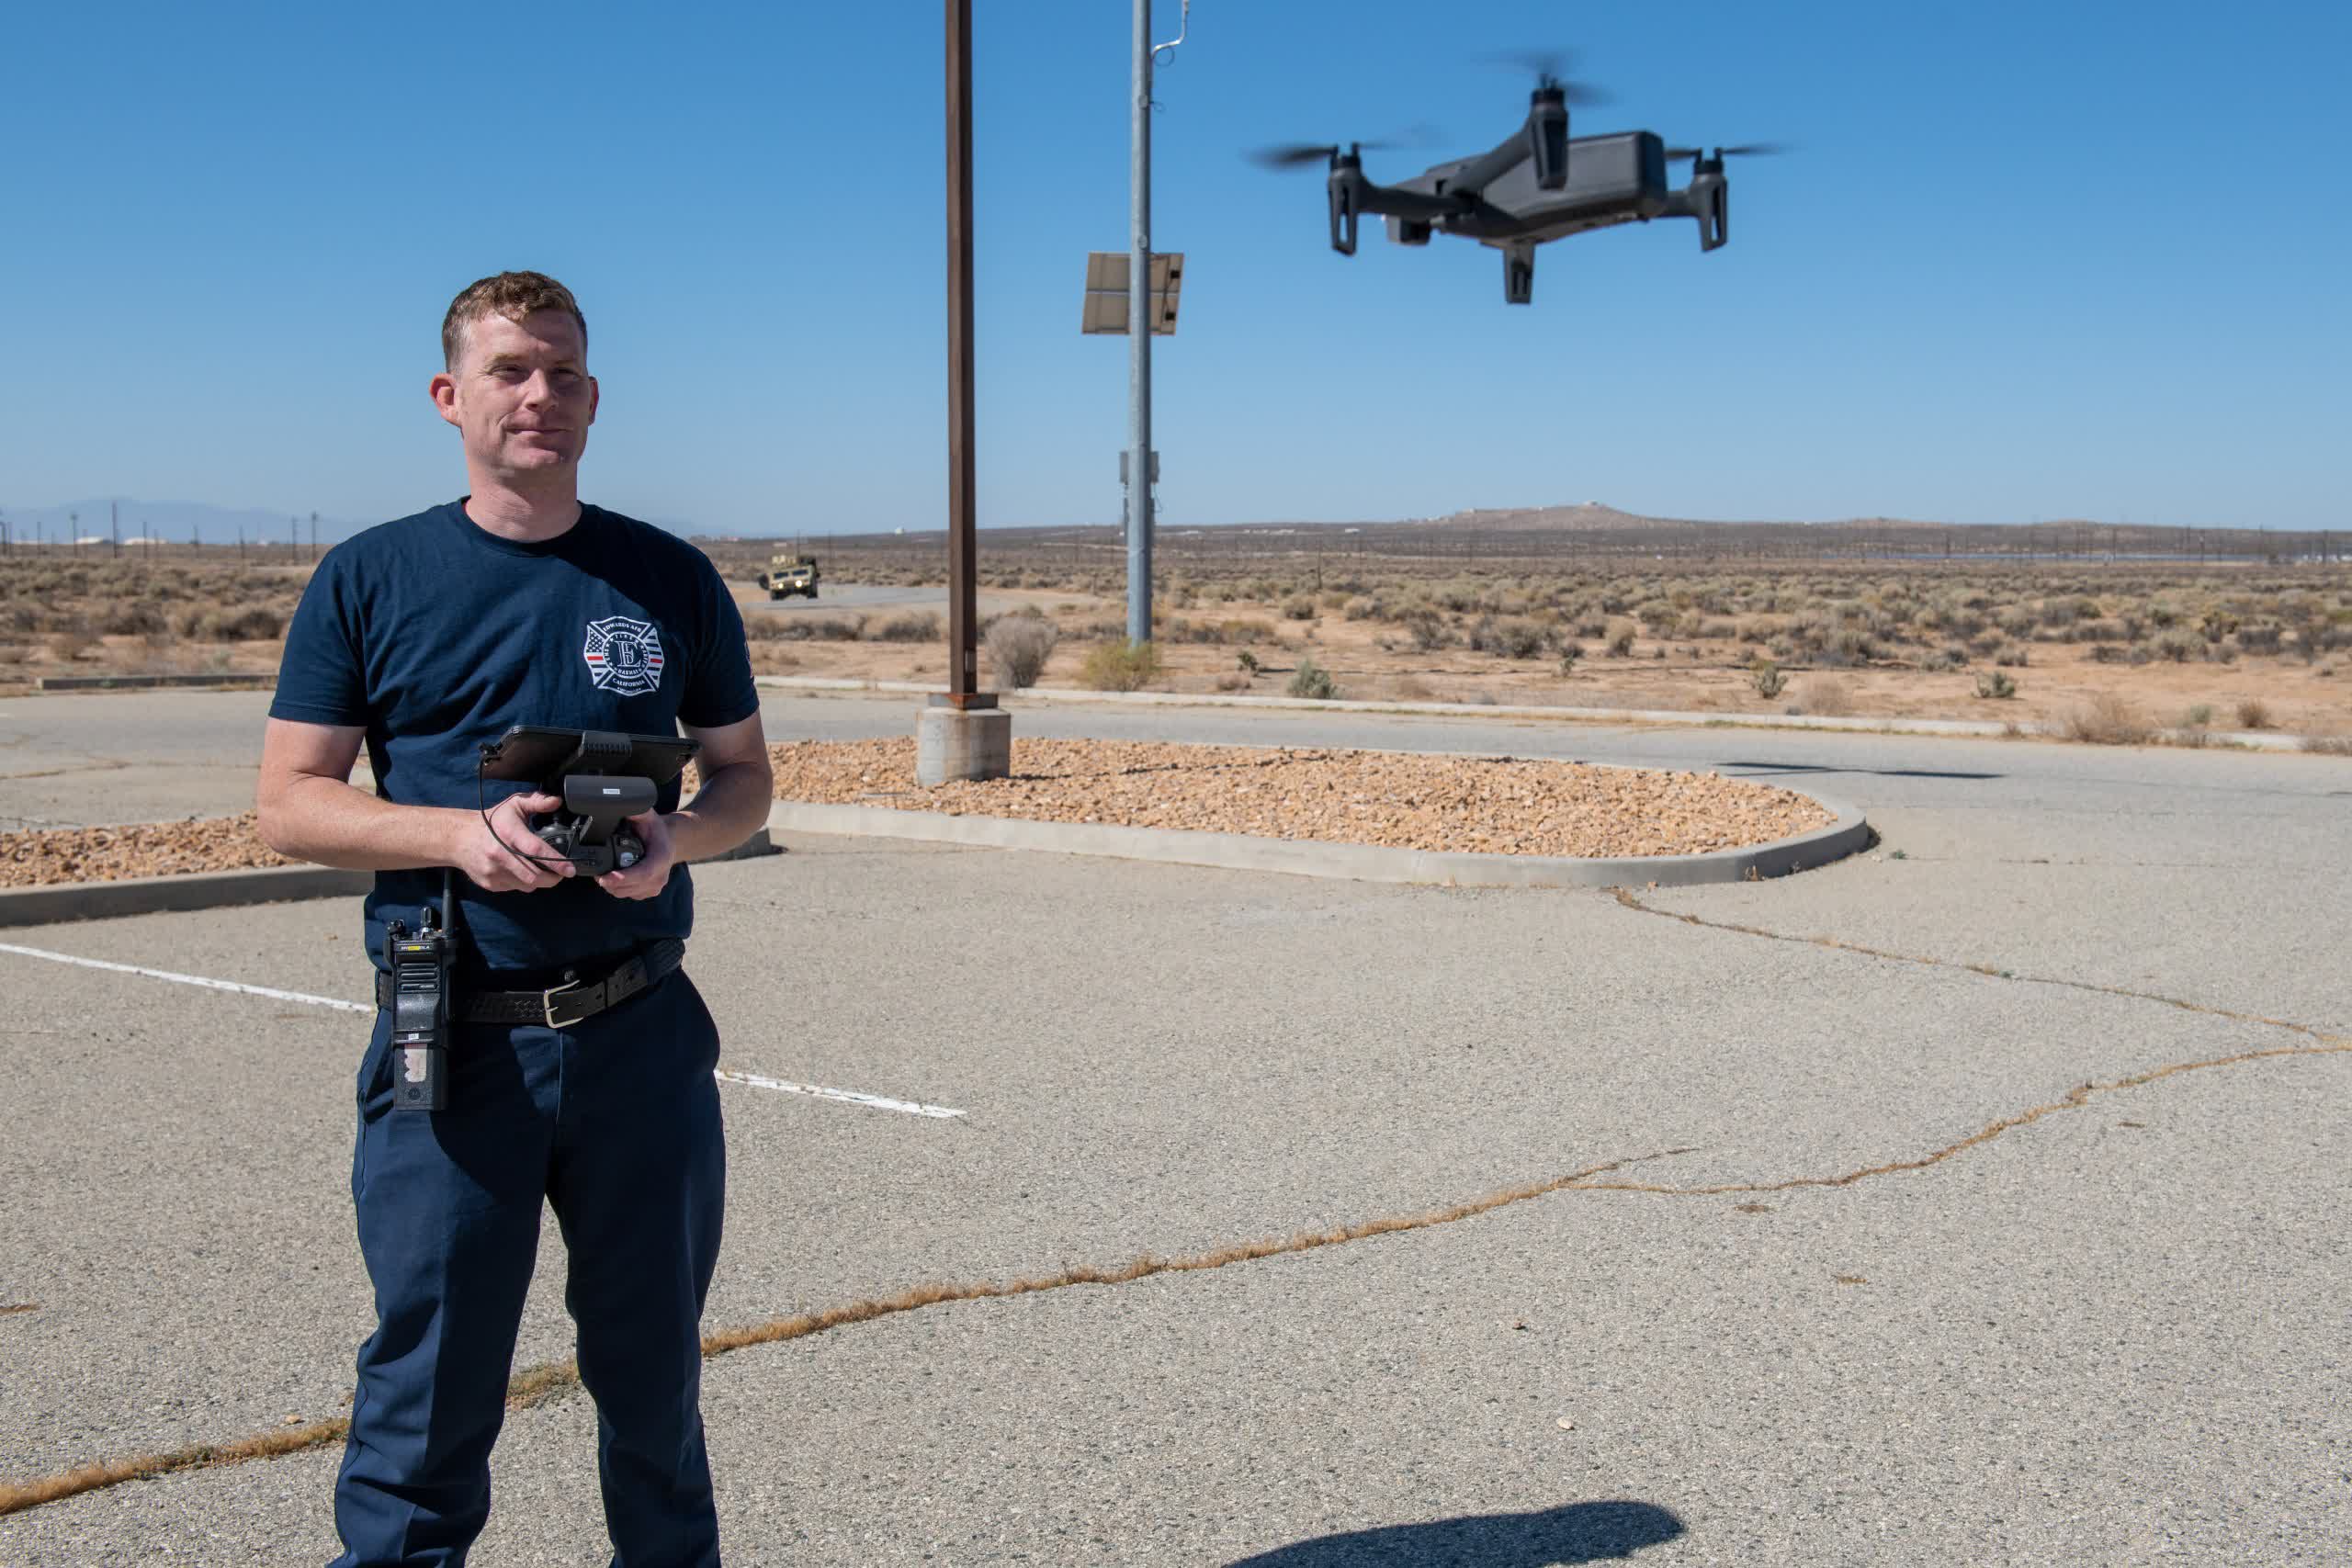 USAF begins implementing facial recognition on some of its drone fleet